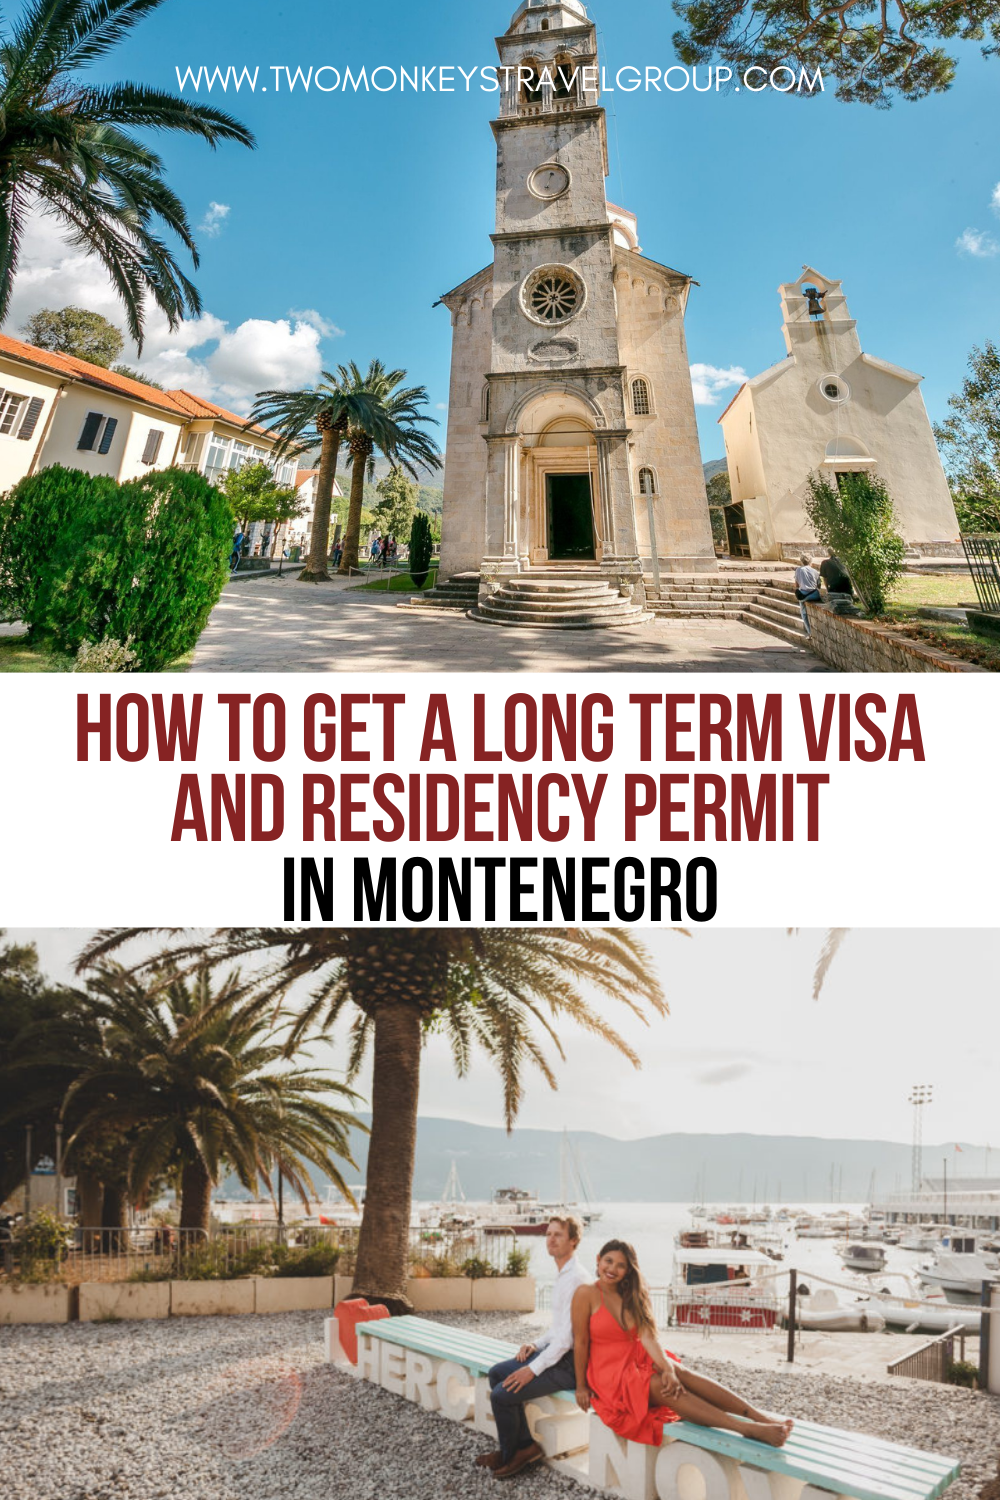 How to Get a Long Term Visa and Residency Permit in Montenegro